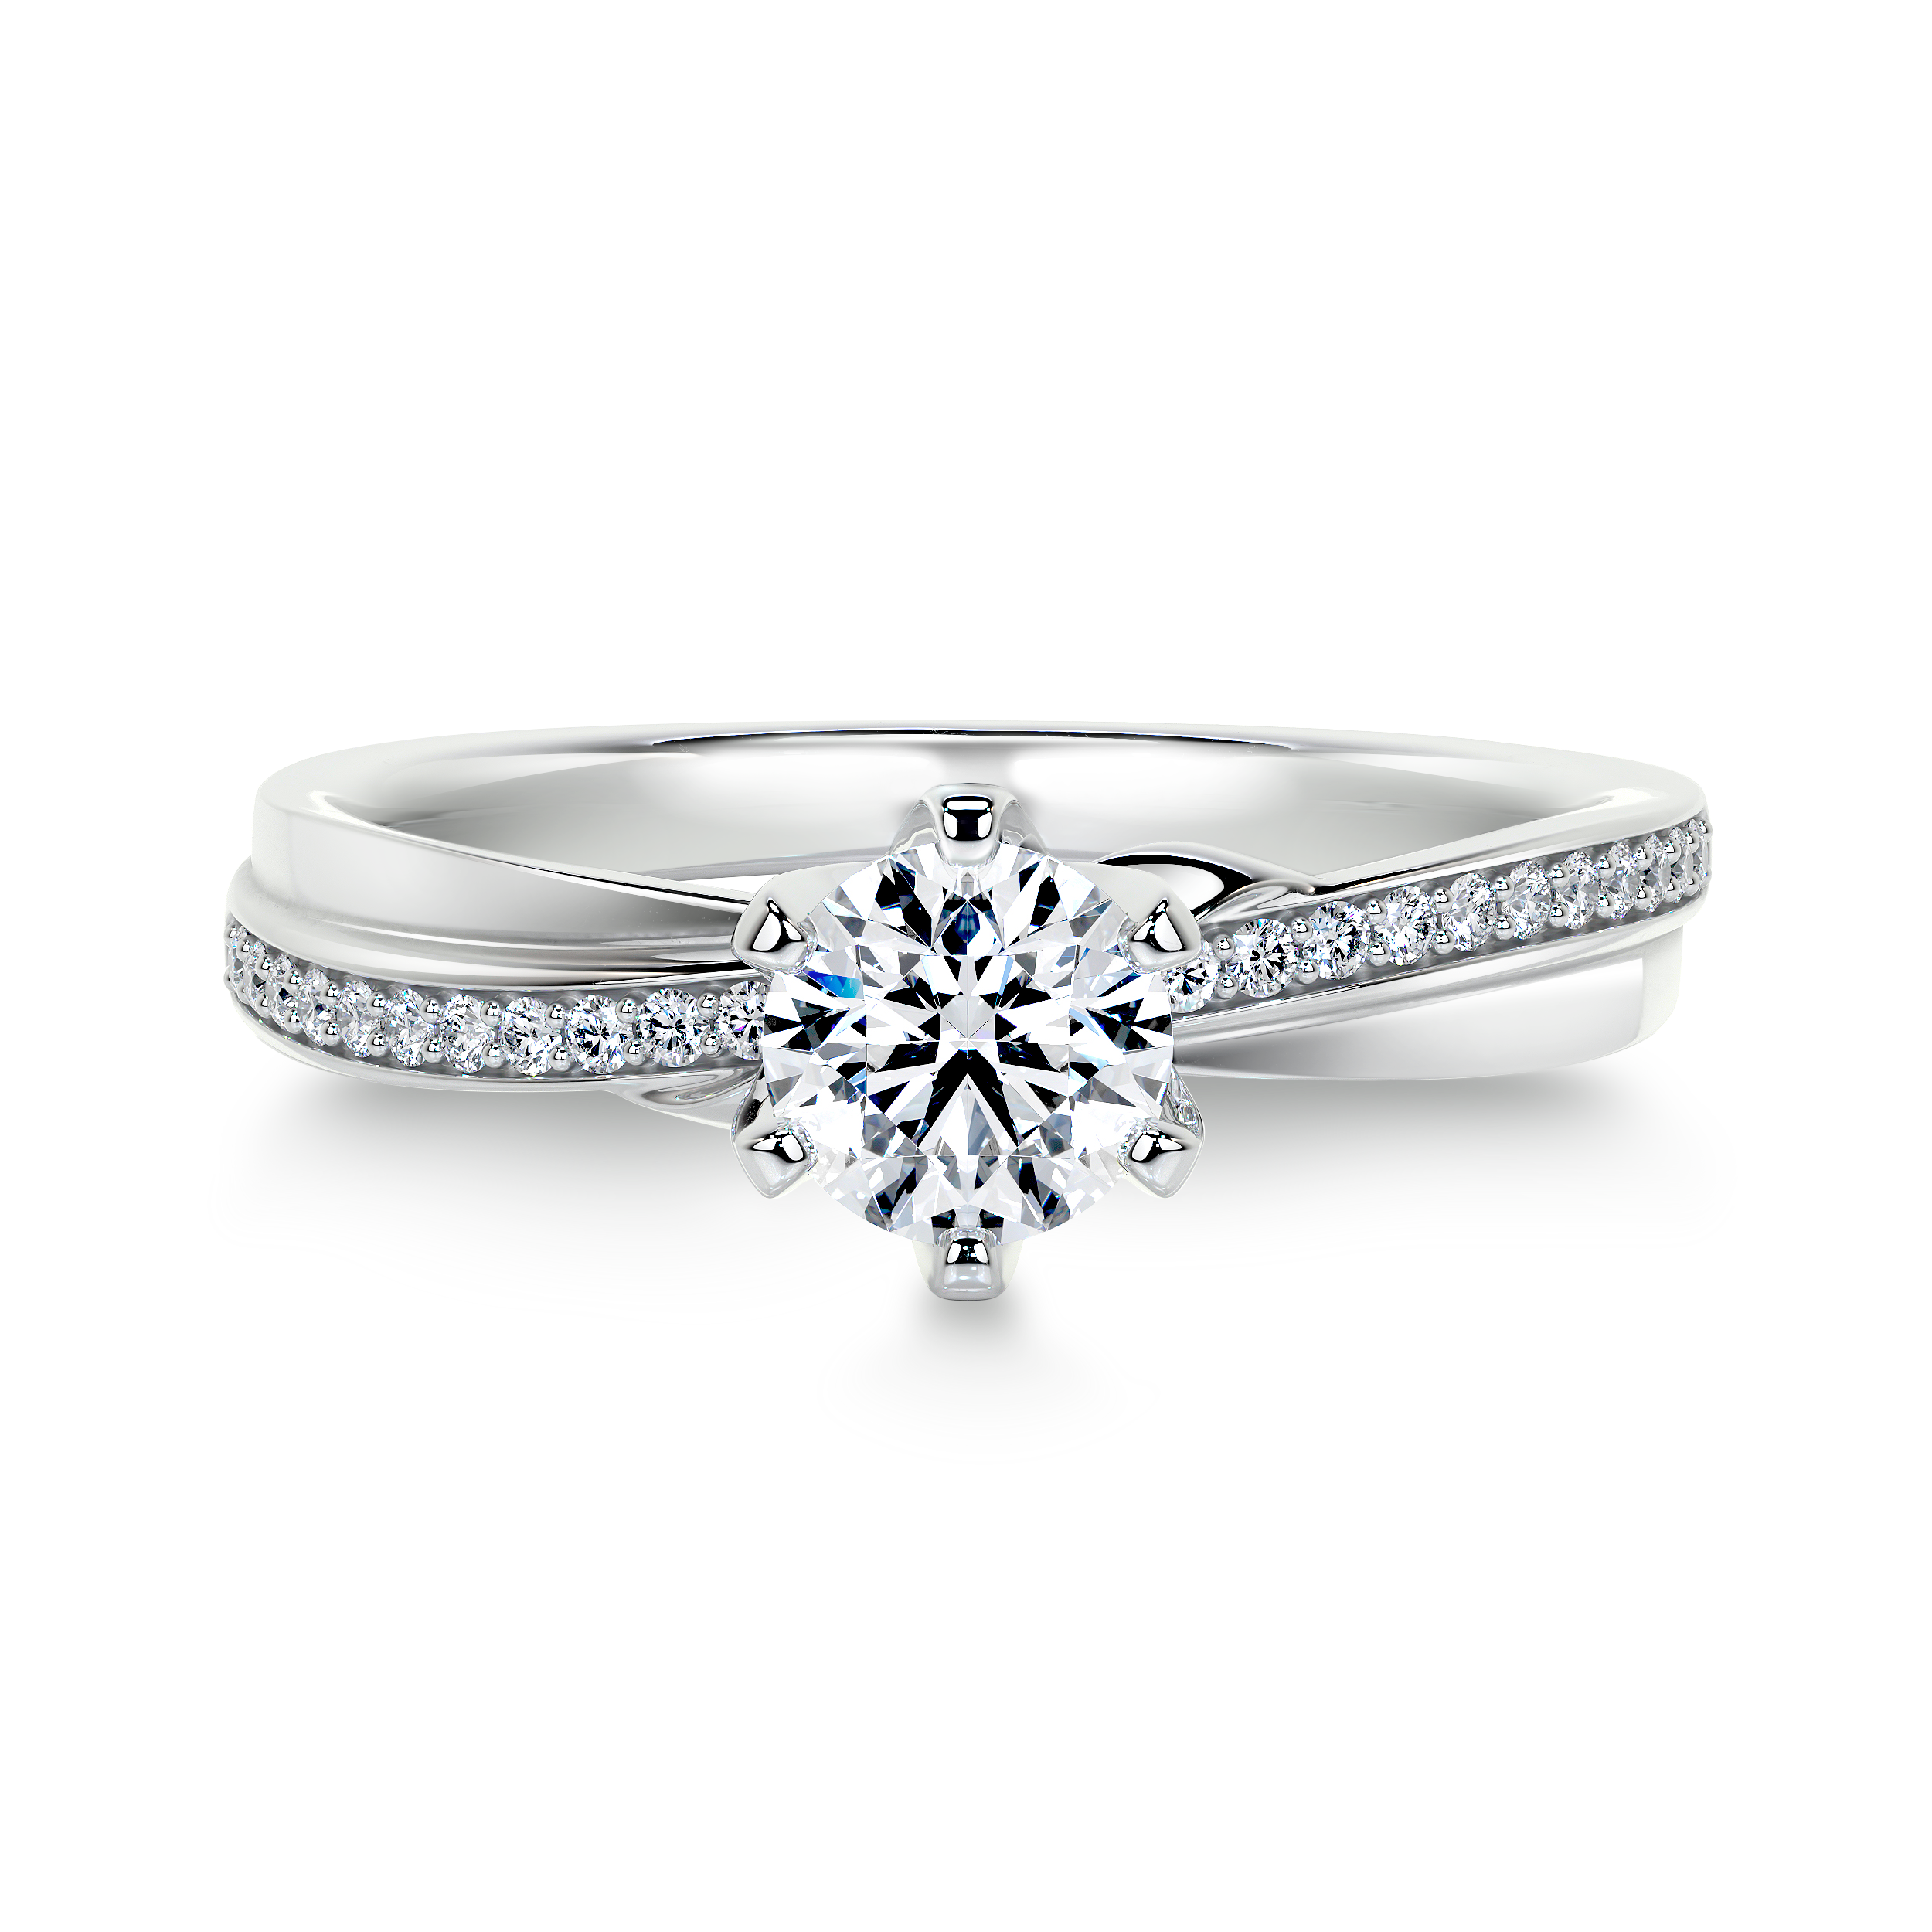 A LOVE : Love Knot RSC221 Engagement Ring